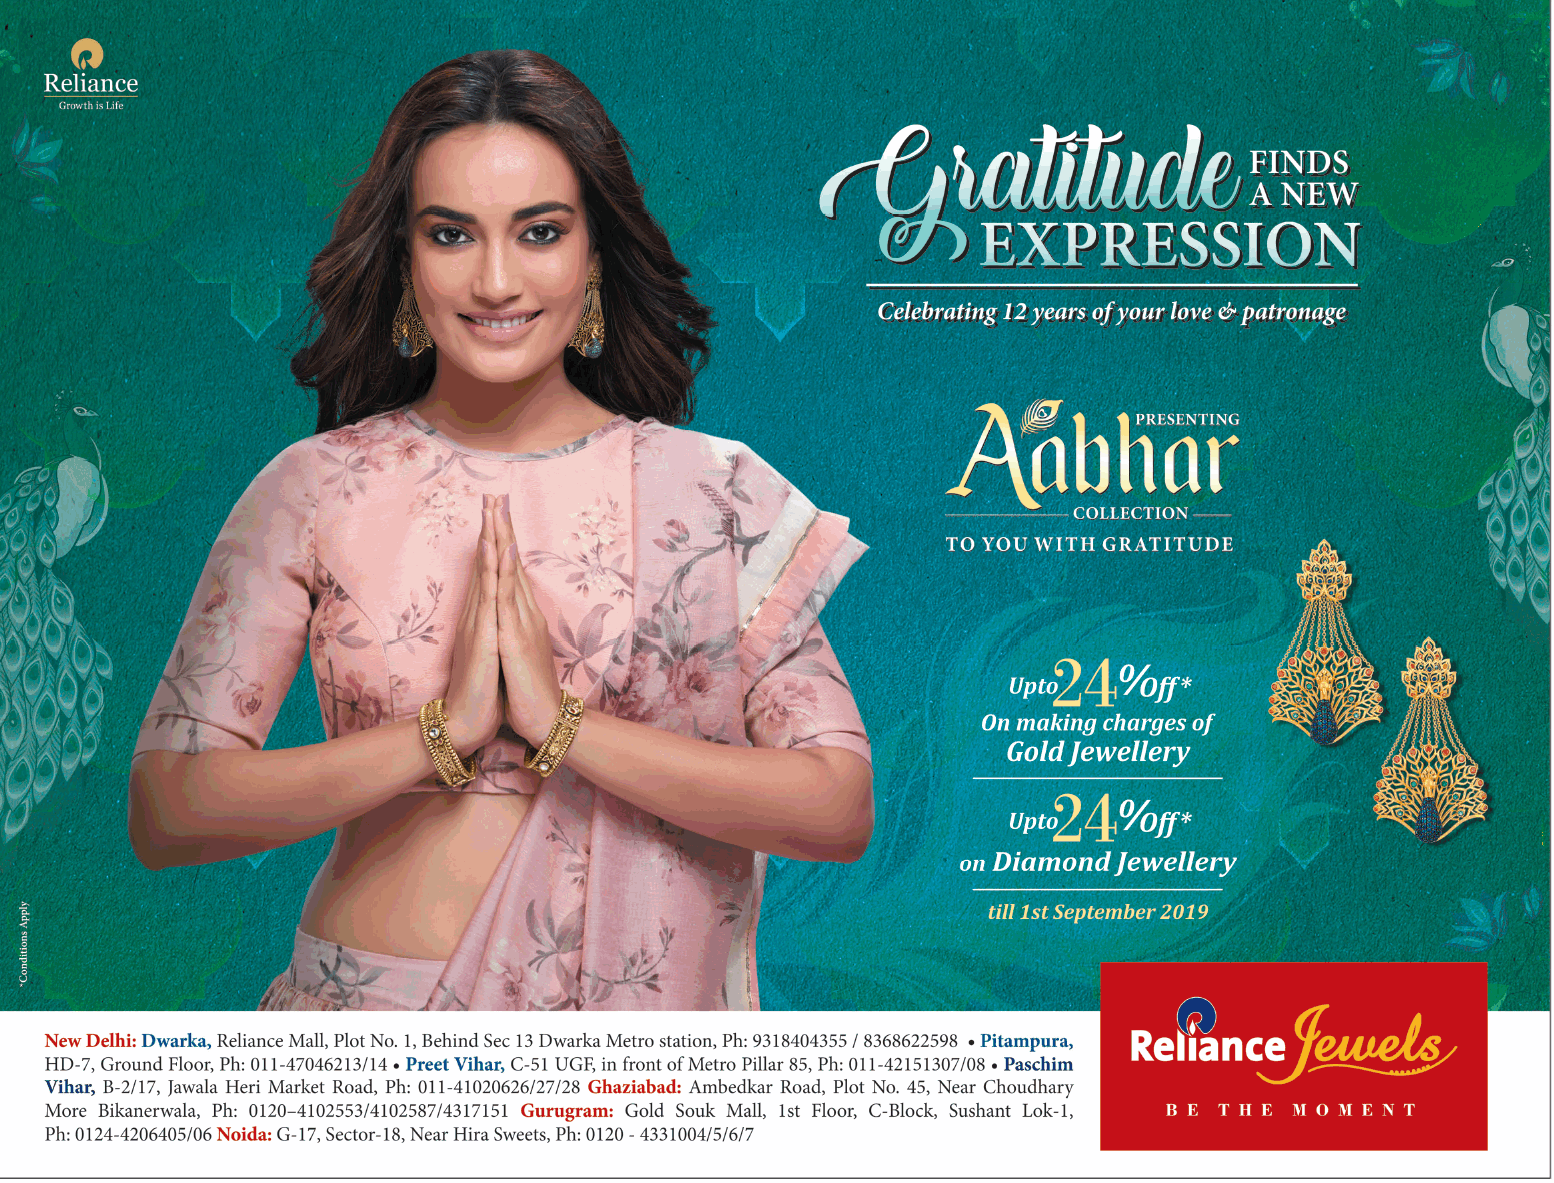 reliance-jewels-gratitude-finds-a-new-expression-ad-delhi-times-02-08-2019.png